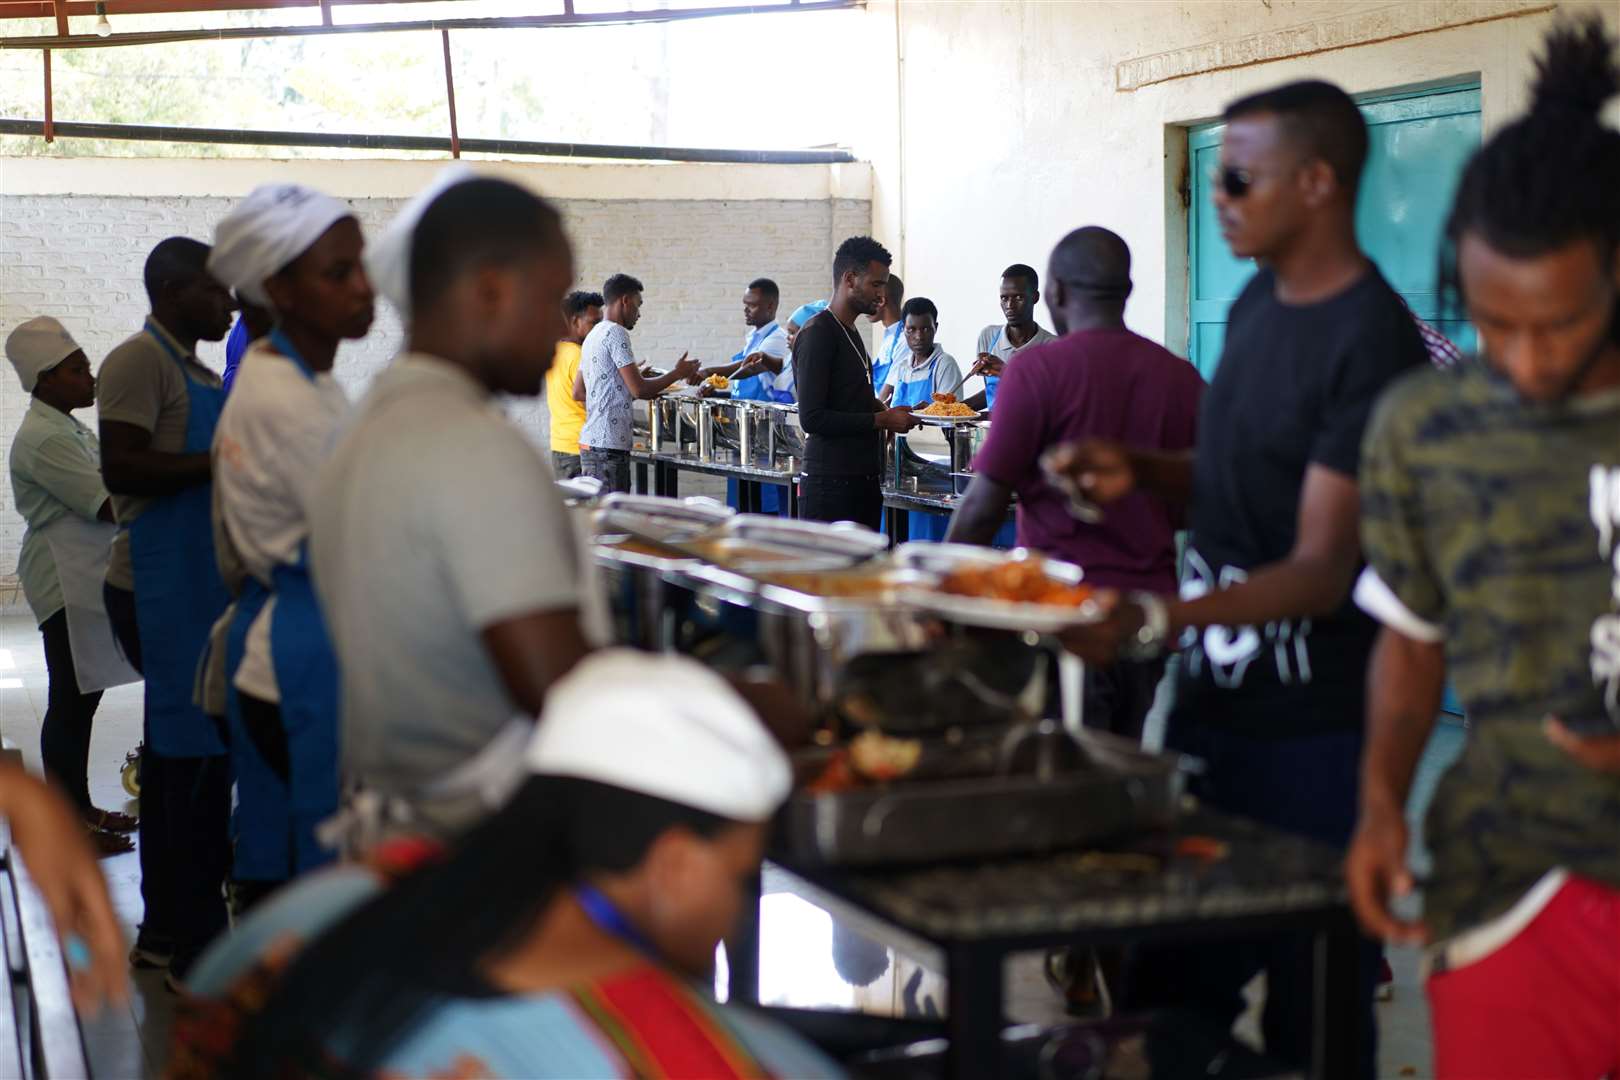 Residents are served food in the canteen (Victoria Jones/PA)